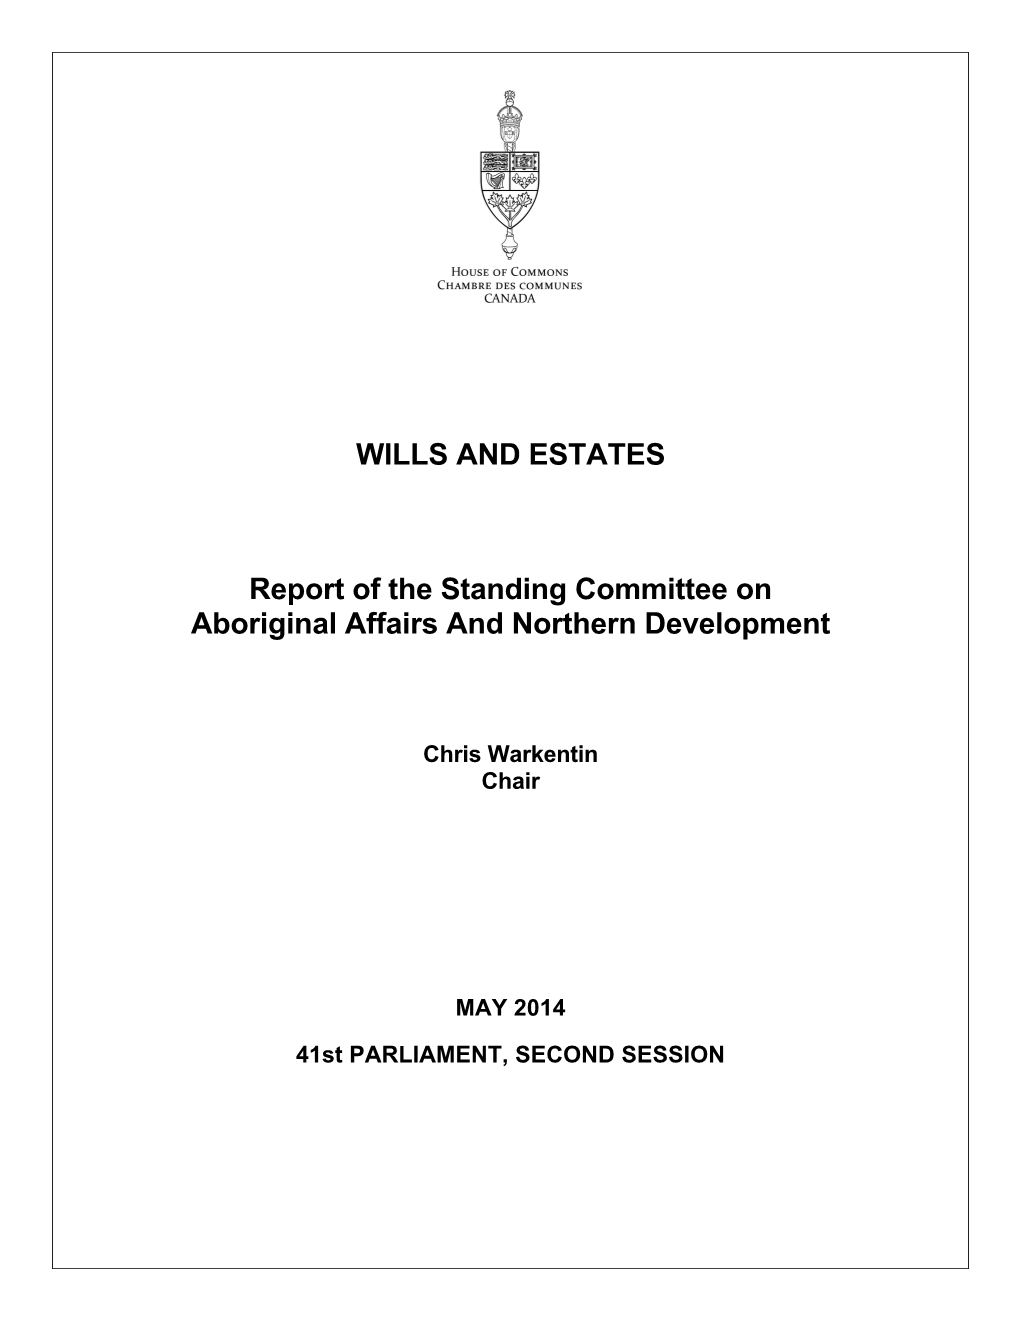 WILLS and ESTATES Report of the Standing Committee on Aboriginal